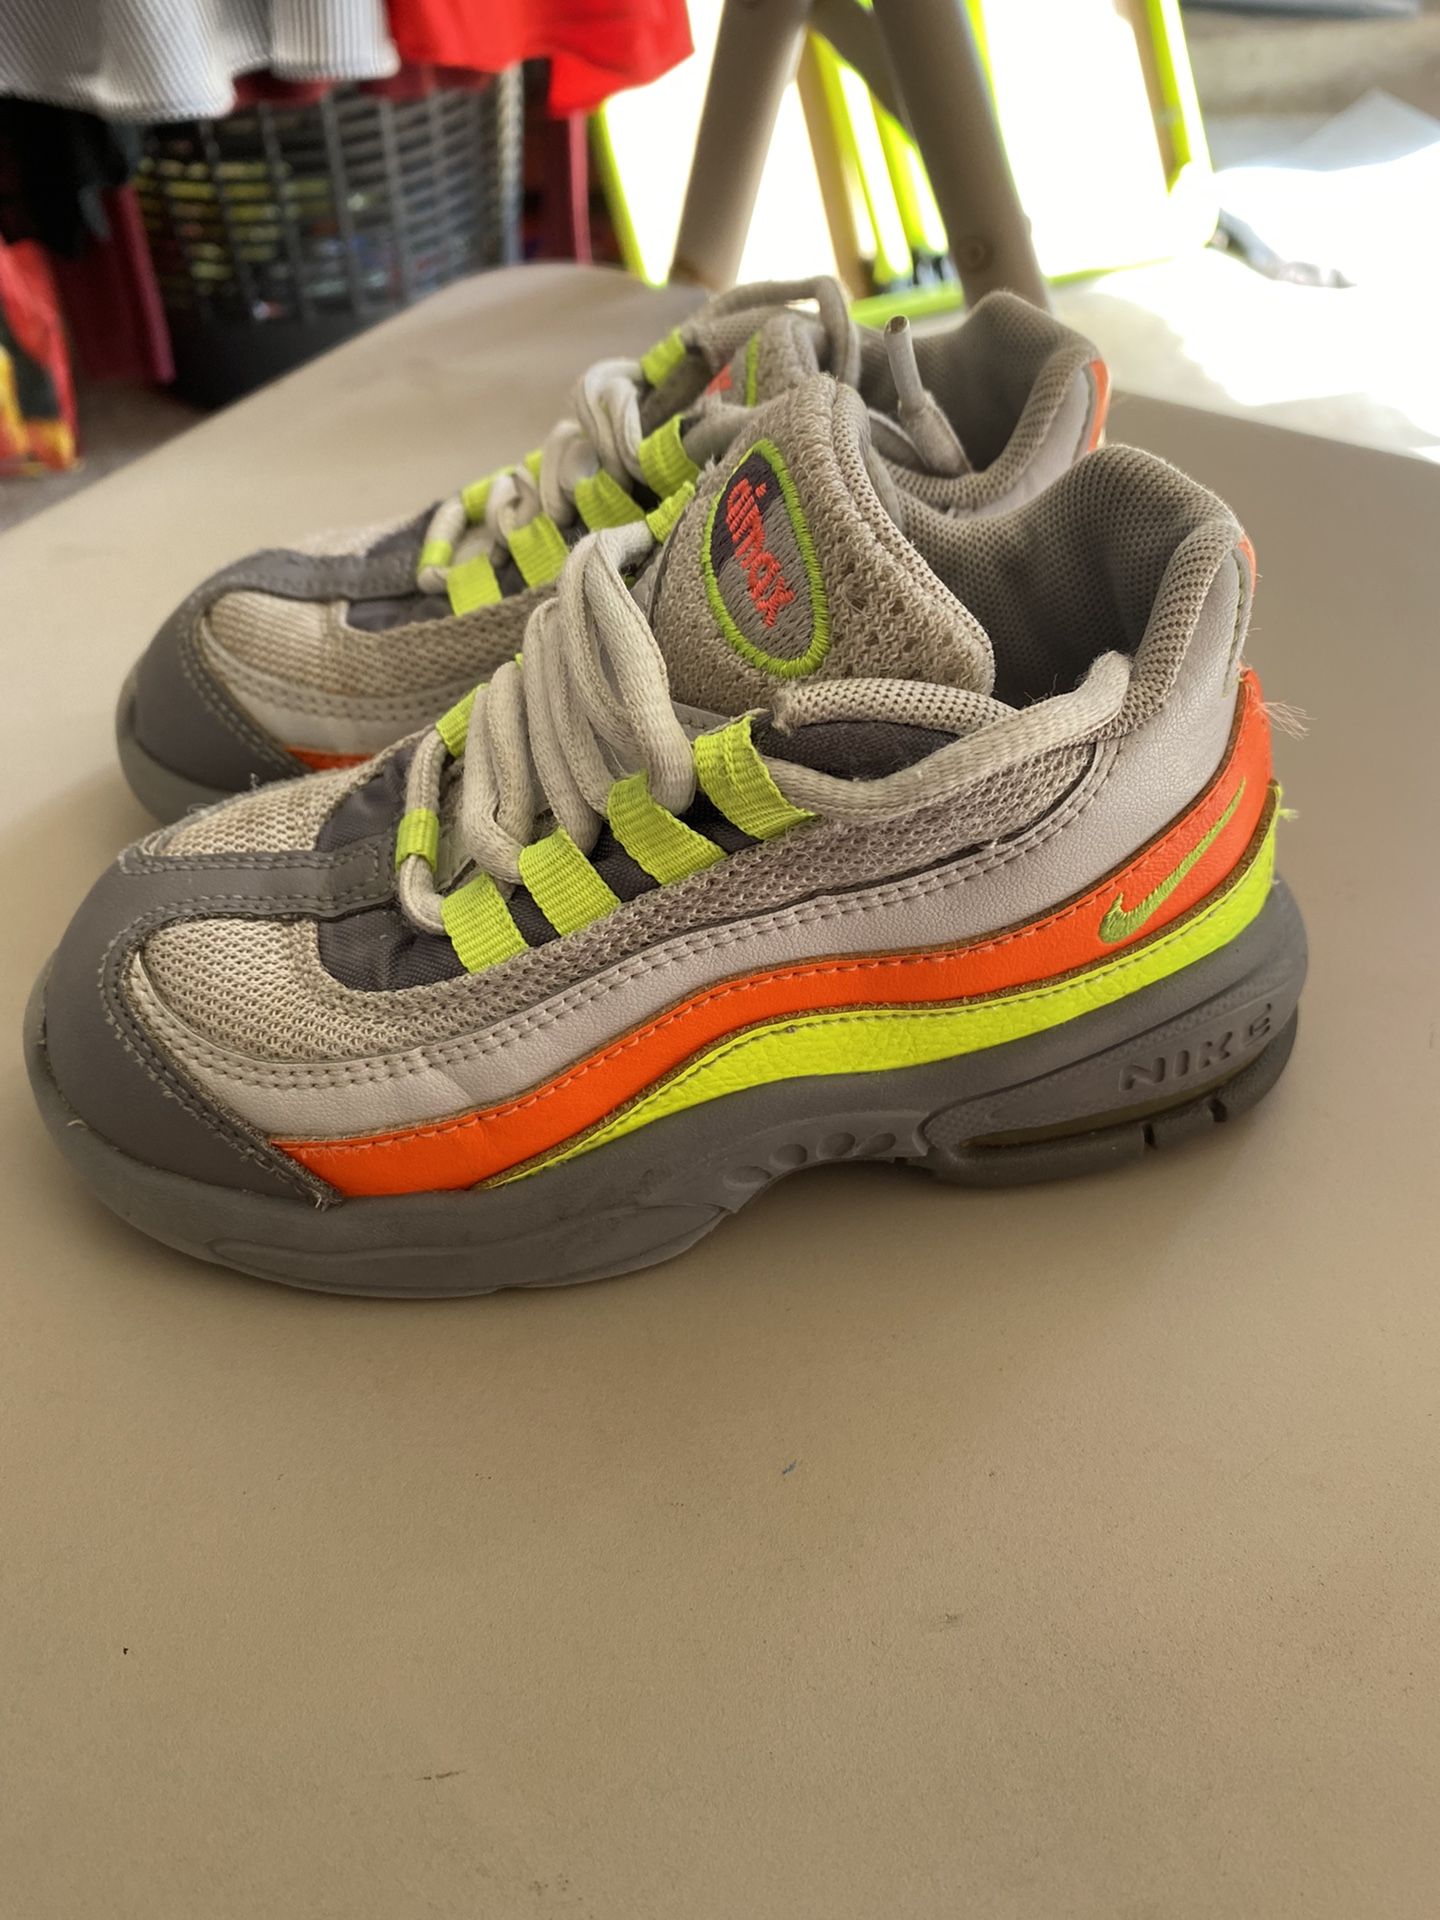 Nike Size 9c Toddler  $15 FIRM